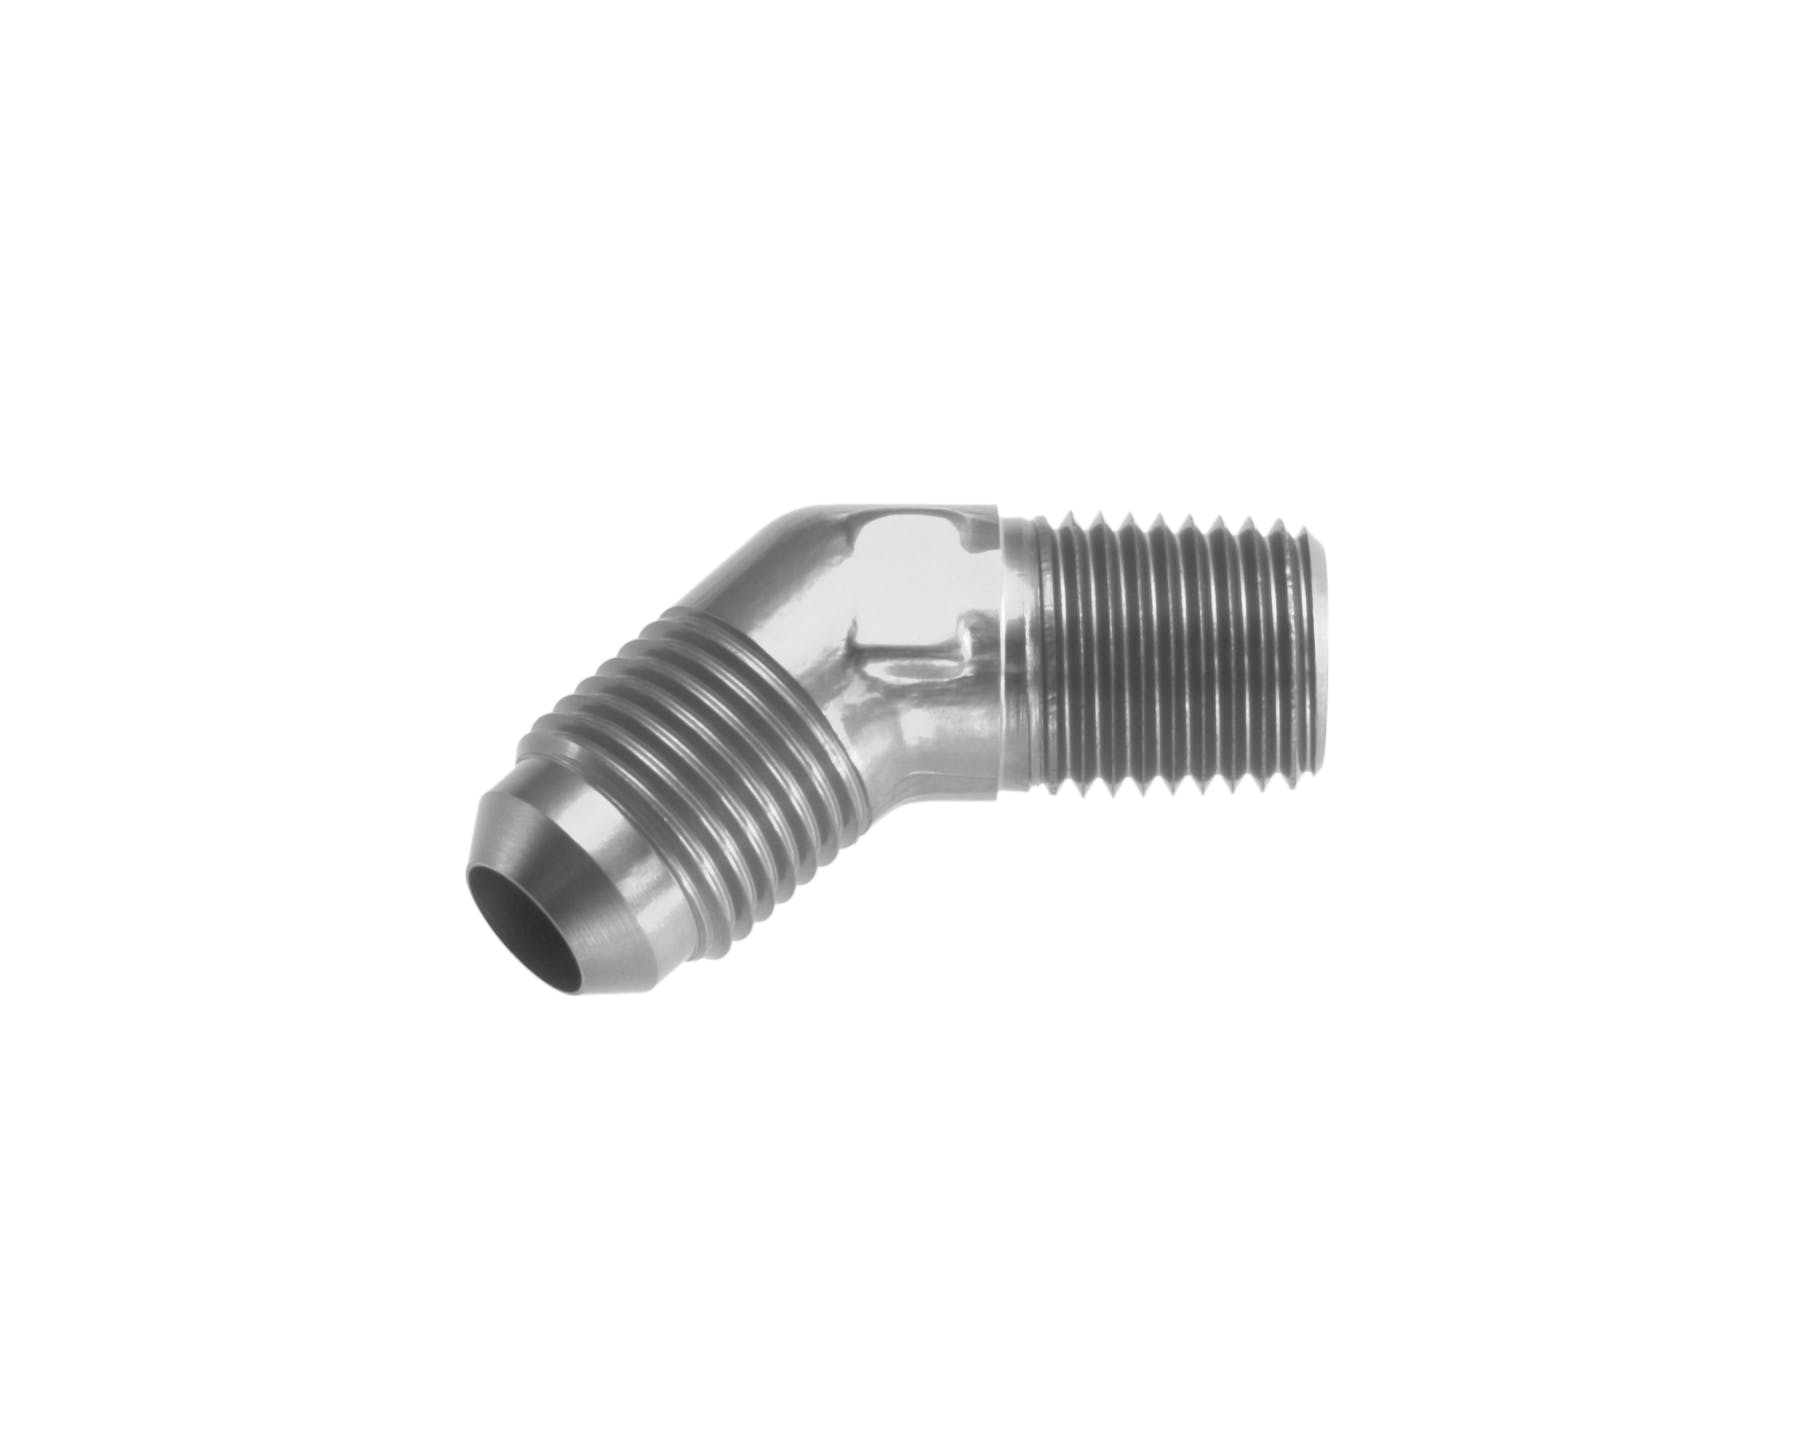 Redhorse Performance 823-06-04-5 -06 45 degree Male adapter to -04 (1/4in) NPT Male - clear